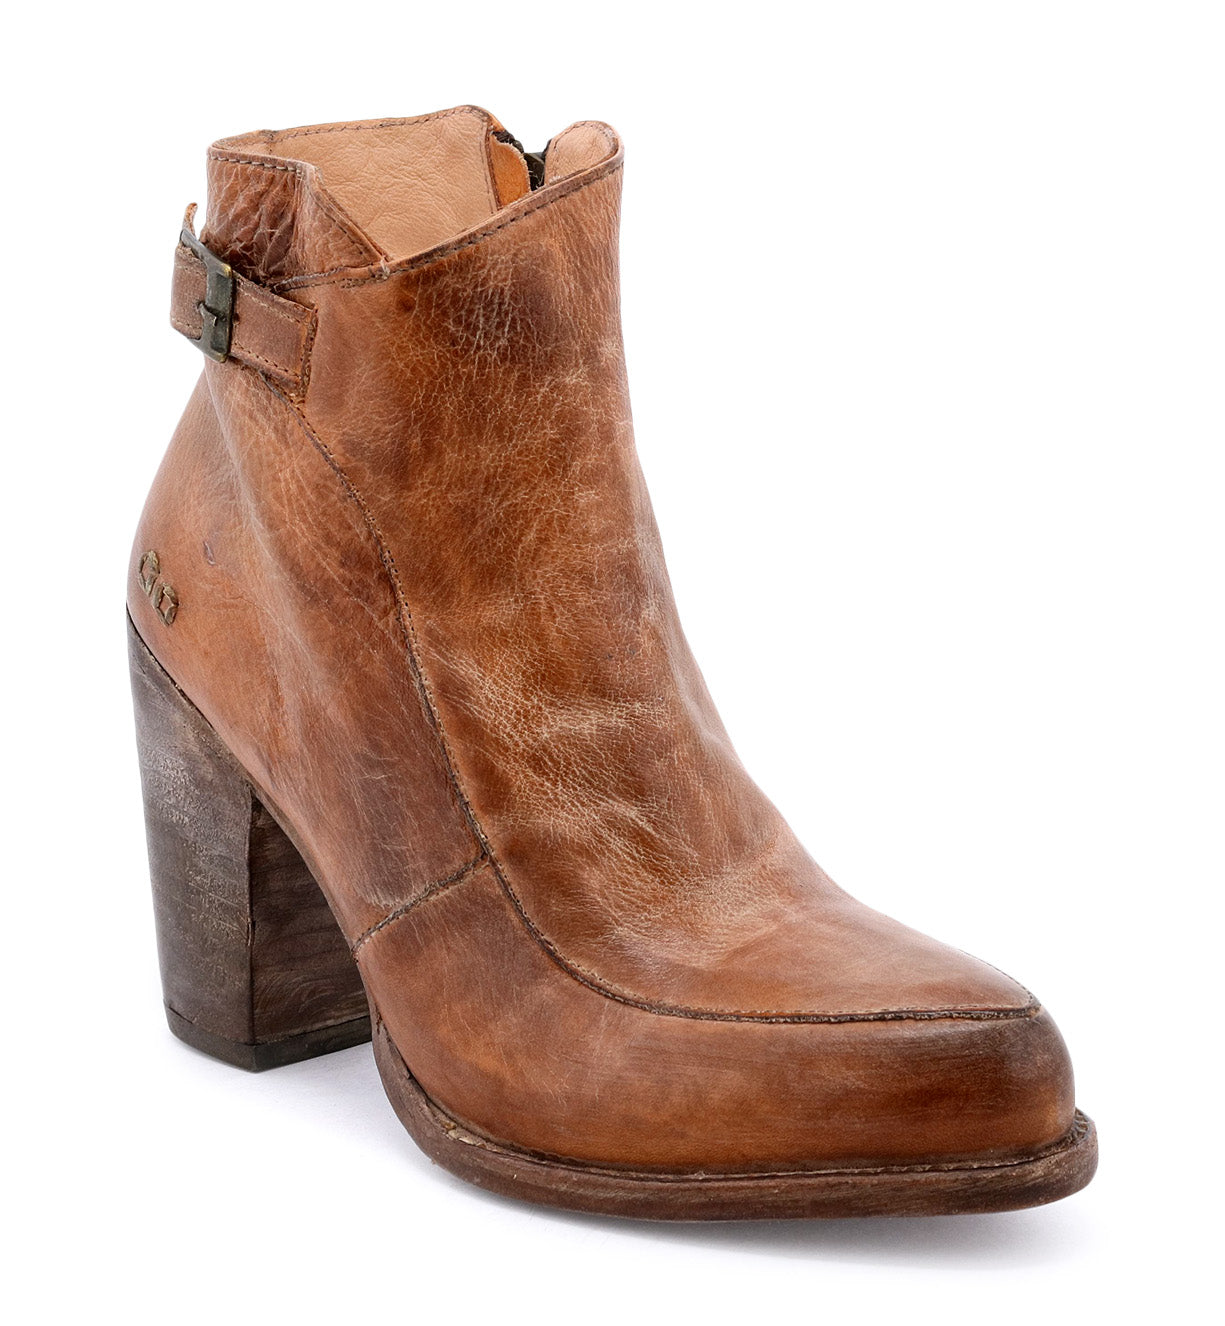 A women's brown ankle boot with a wooden heel, called the Isla by Bed Stu.